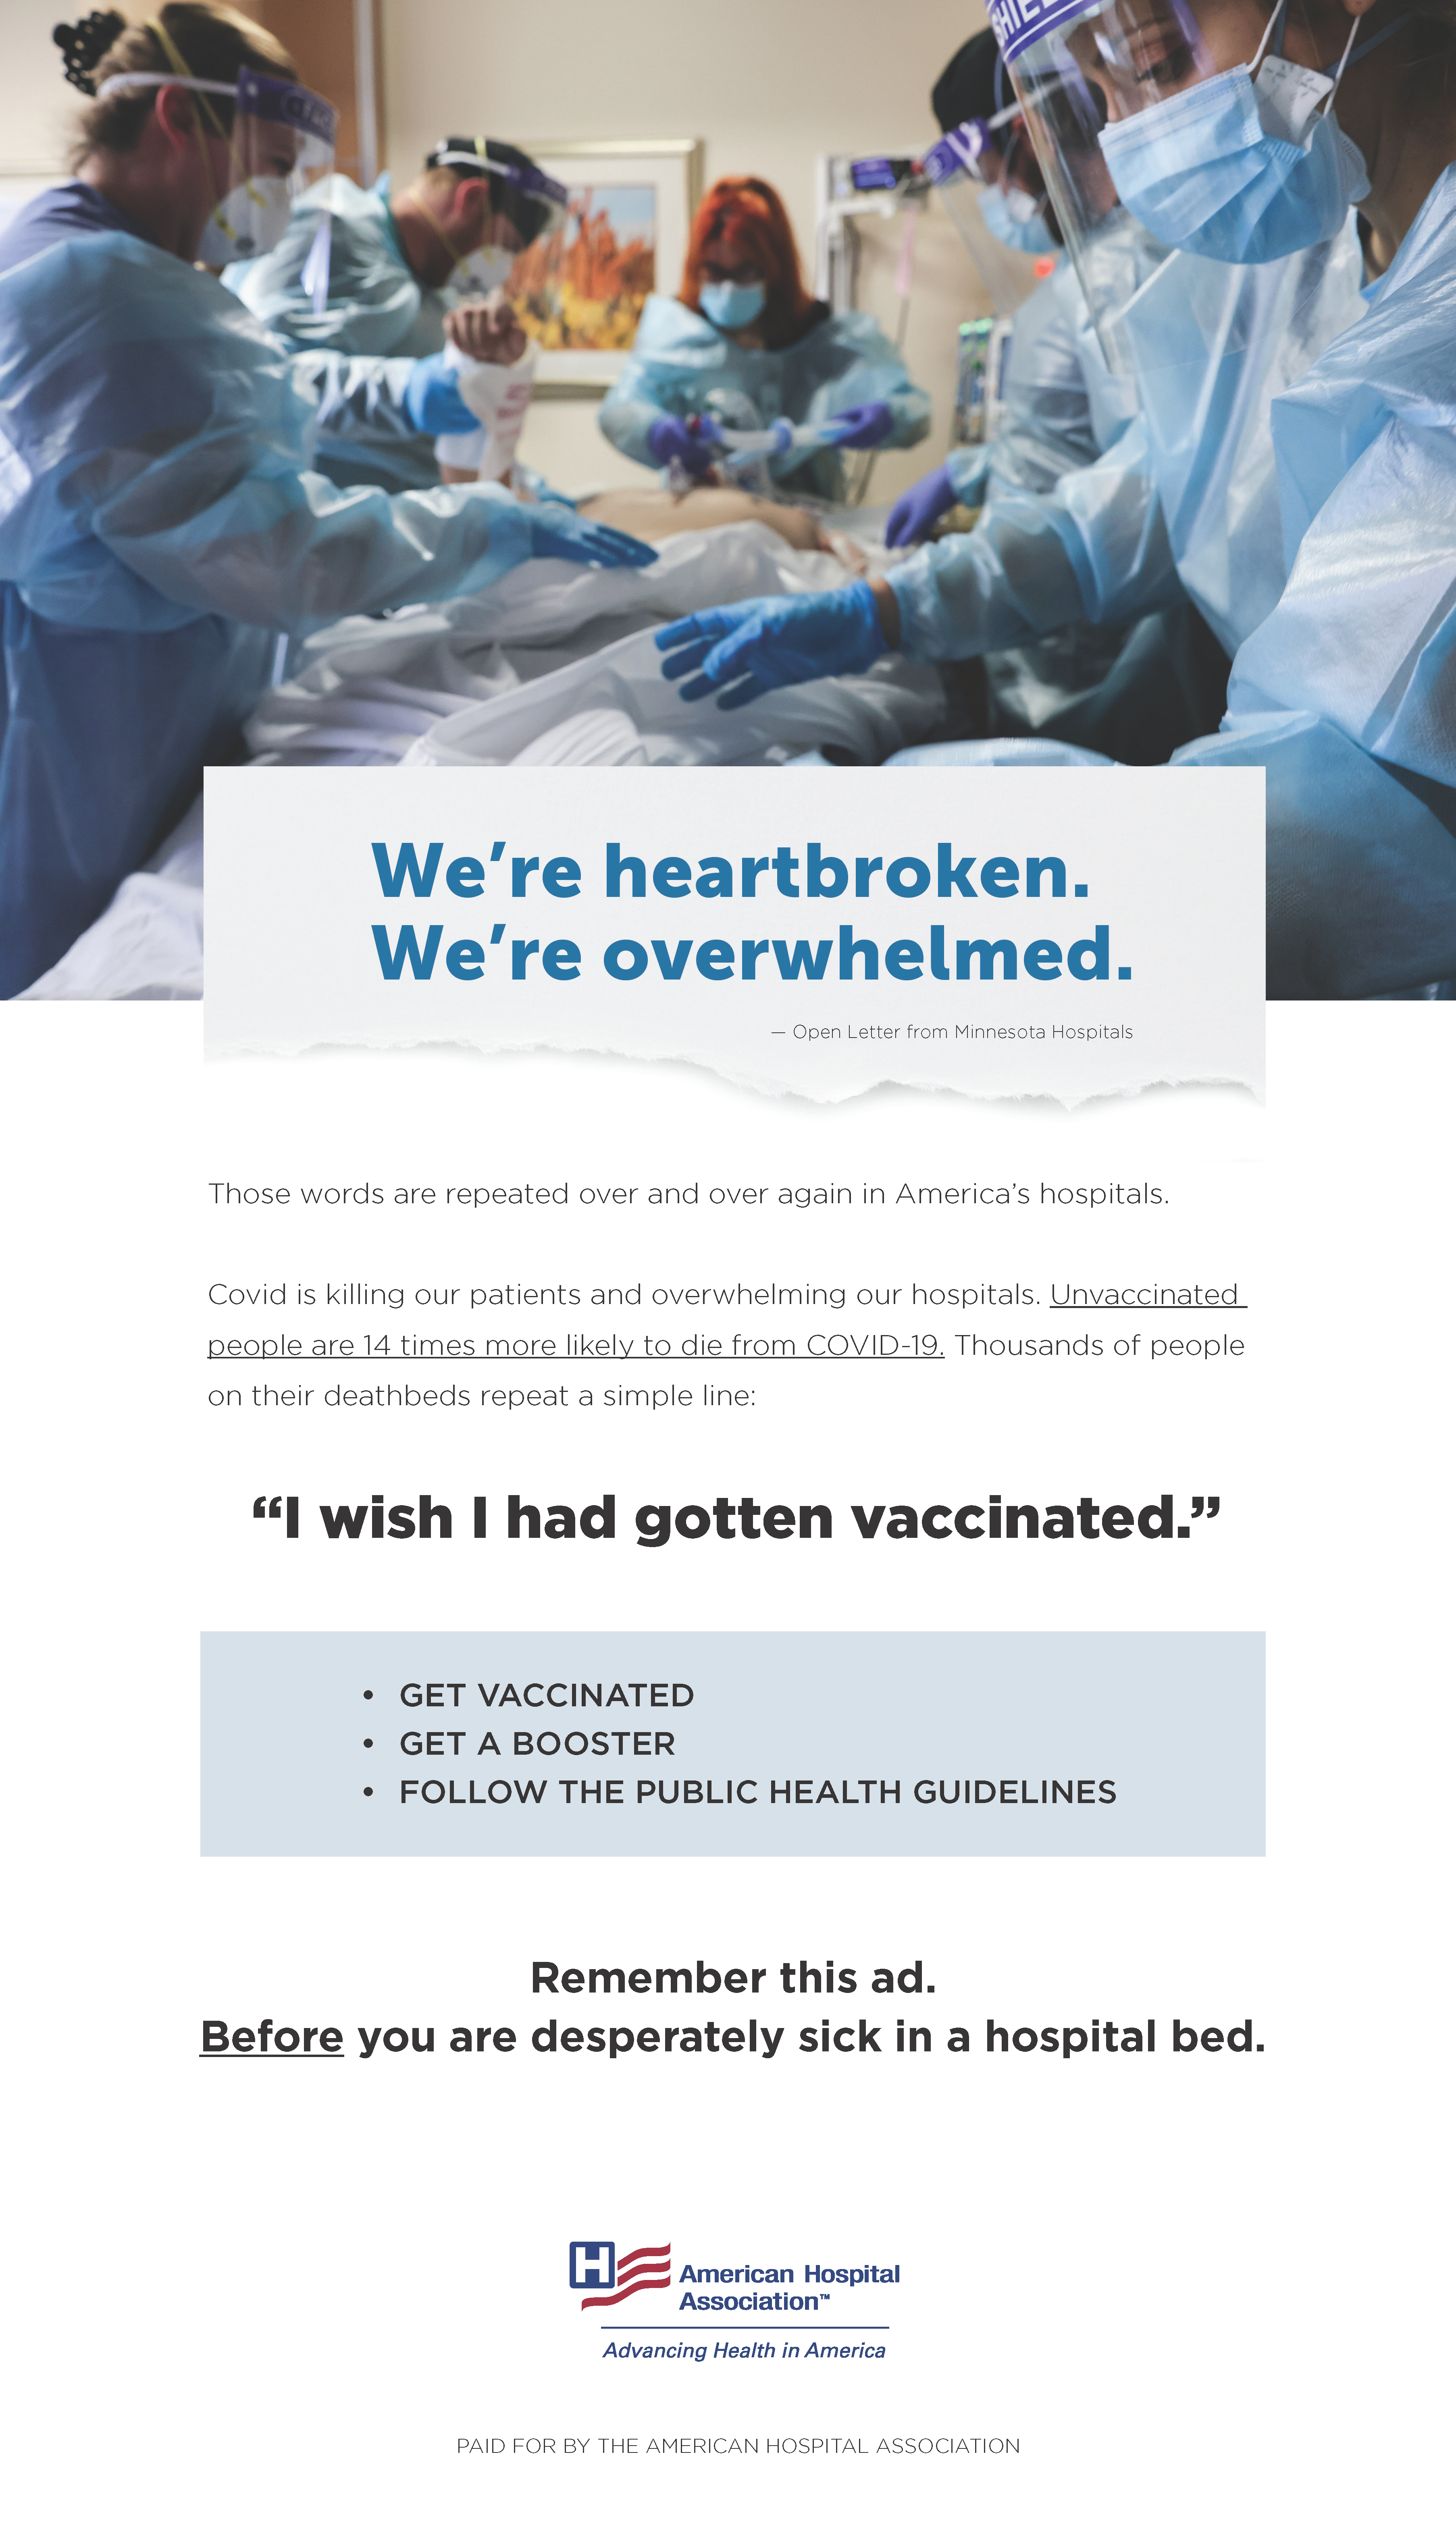 We're heartbroken. We're overwhelmed. — Open Letter from Minnesota Hospitals. Those words are repeated over and over again in America's hospitals. COVID is killing our patients and overwhelming our hospitals. Unvaccinated people are 14 times more likely to die from COVID-19. Thousands of people on their deathbeds repeat a simple line: "I wish I had gotten vaccinated." Get vaccinated. Get a booster. Follow the public health guidelines. Remember this ad. Before you are desperately sick in a hospital bed.